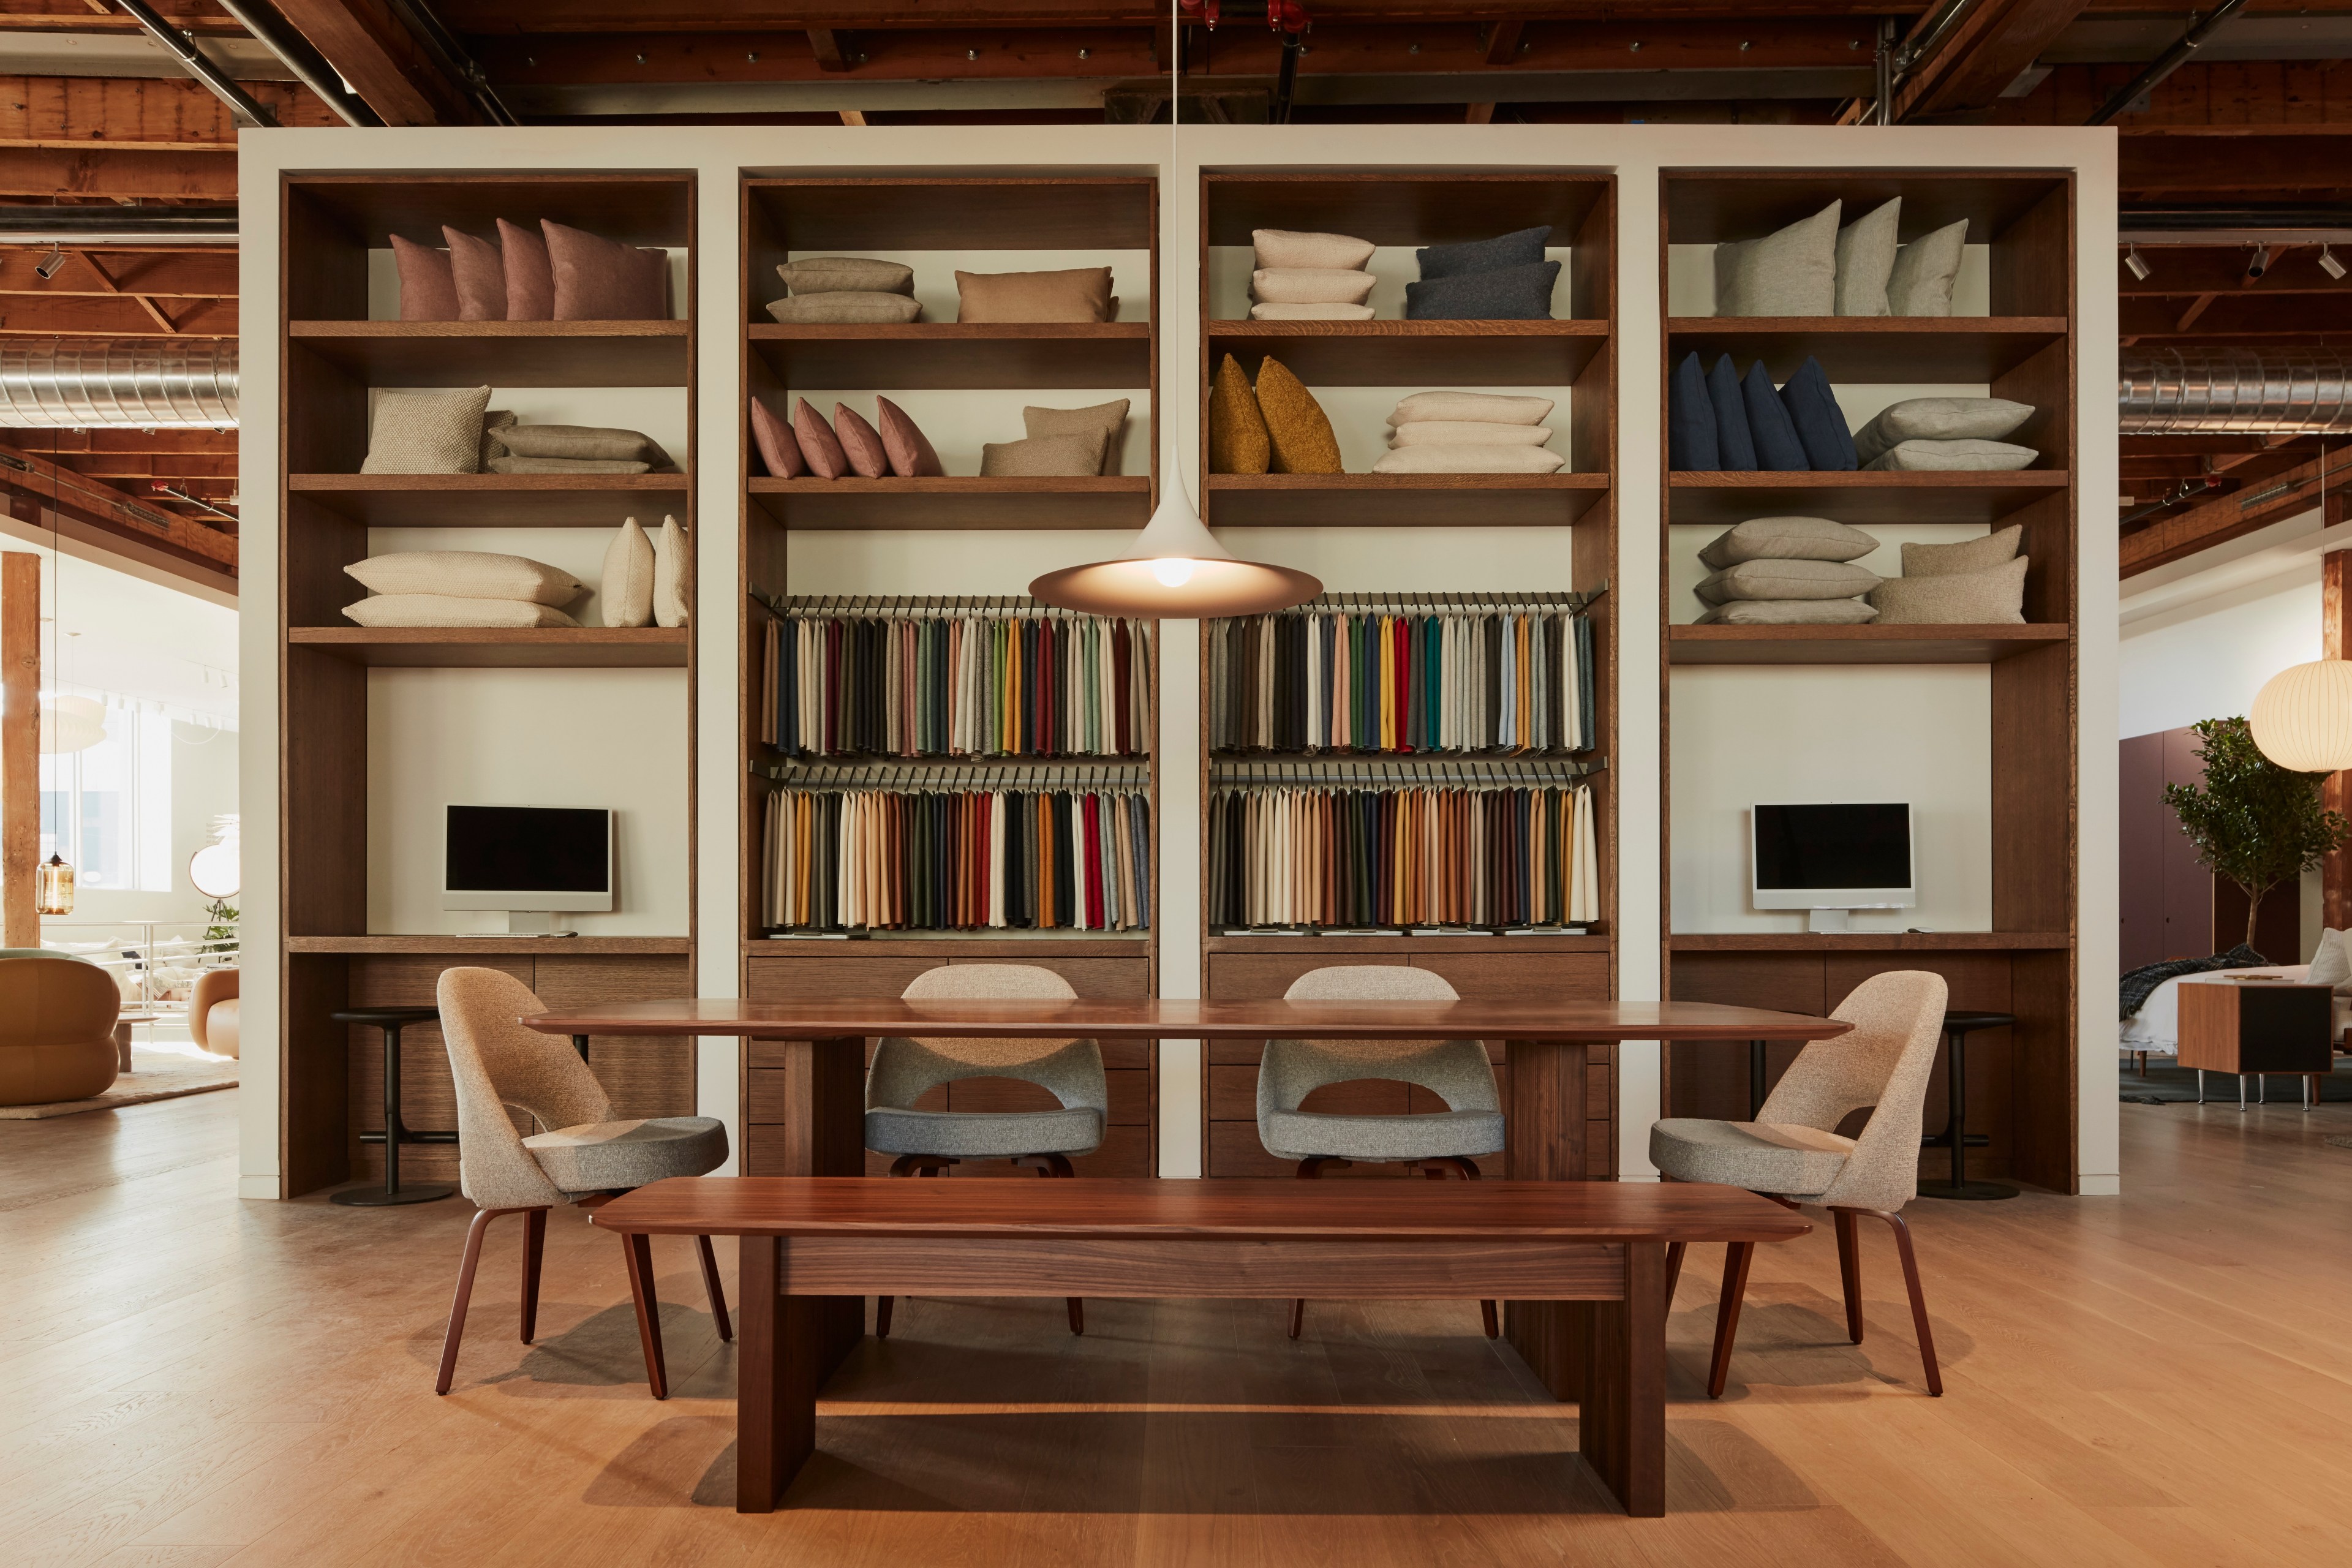 Floor-to-ceiling shelves hold textile samples behind a wooden dining room table and modern chairs.